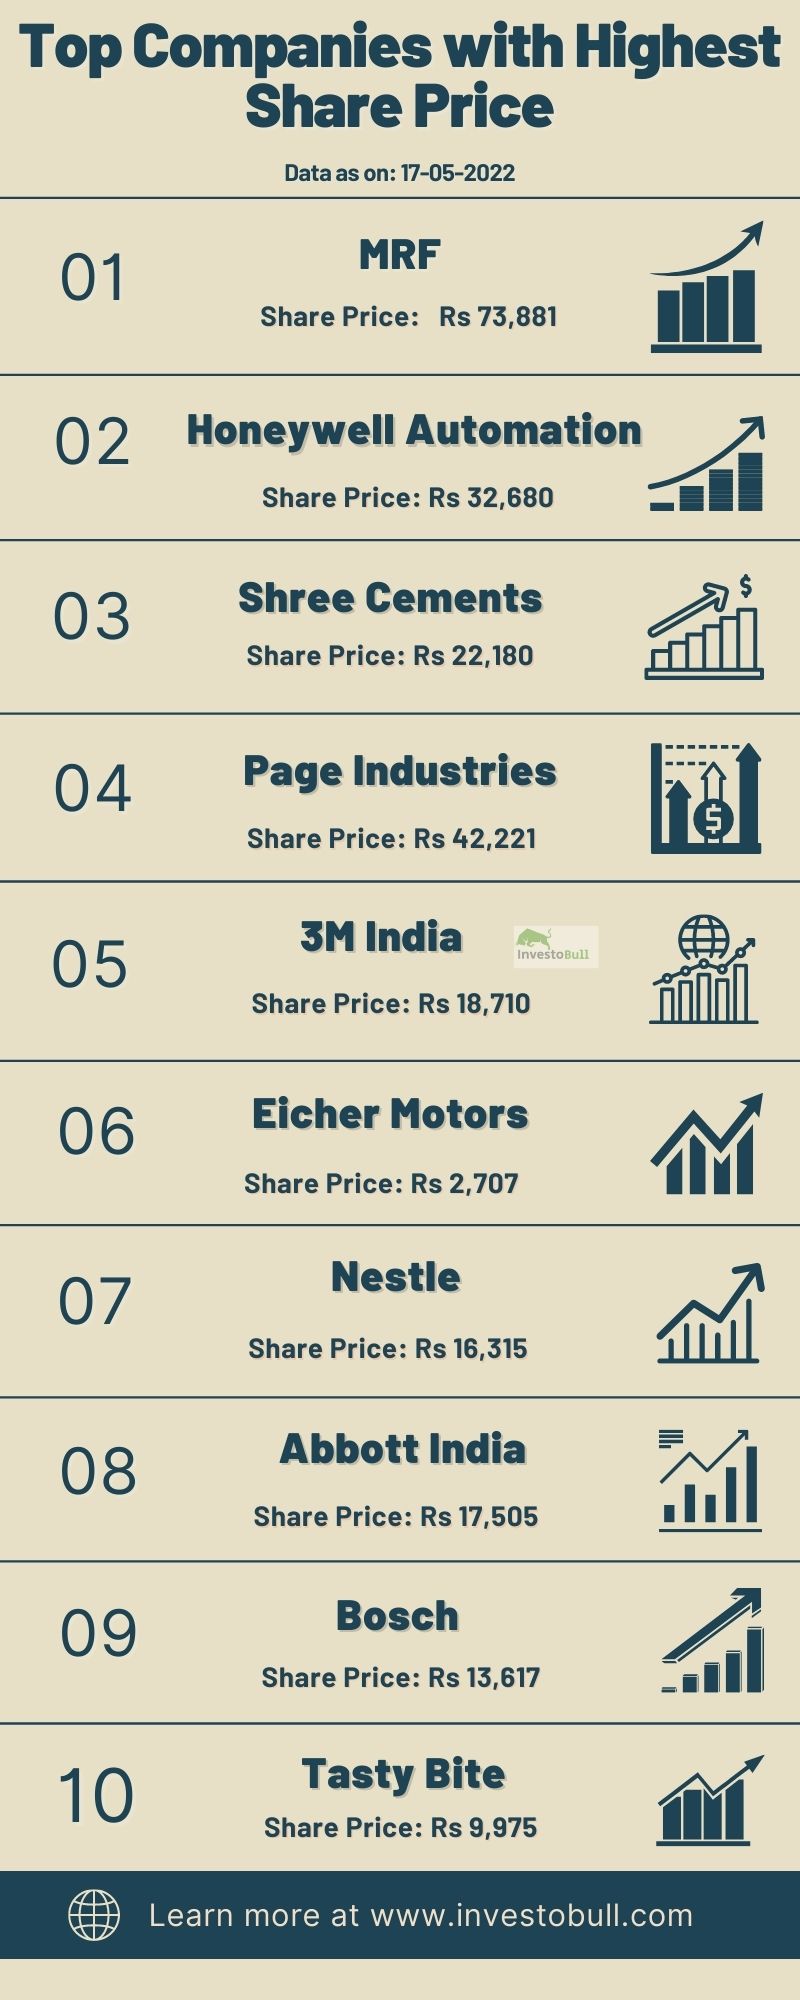 Top companies with highest share price